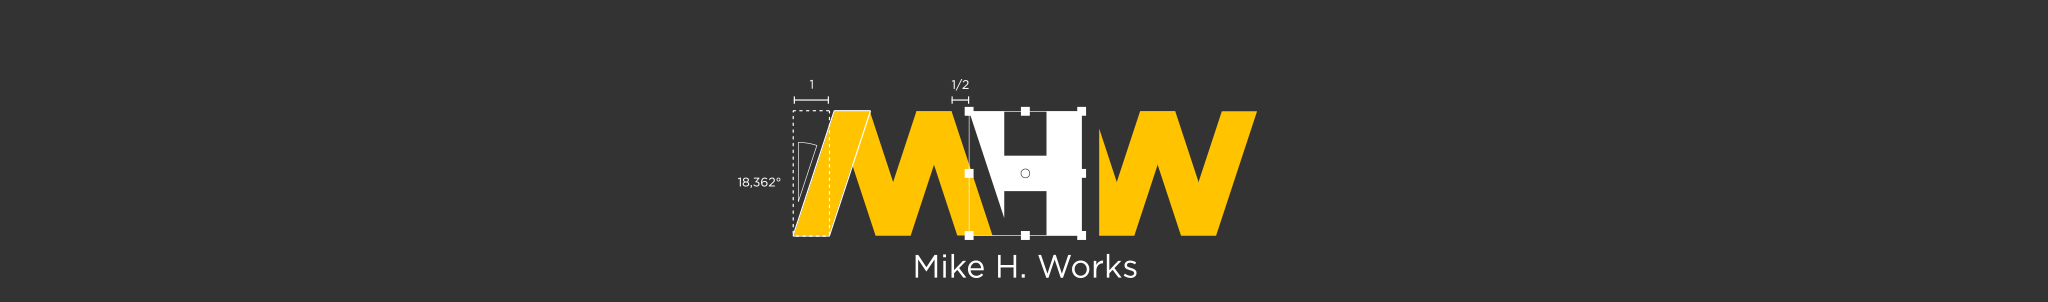 Mike H. Works's profile banner